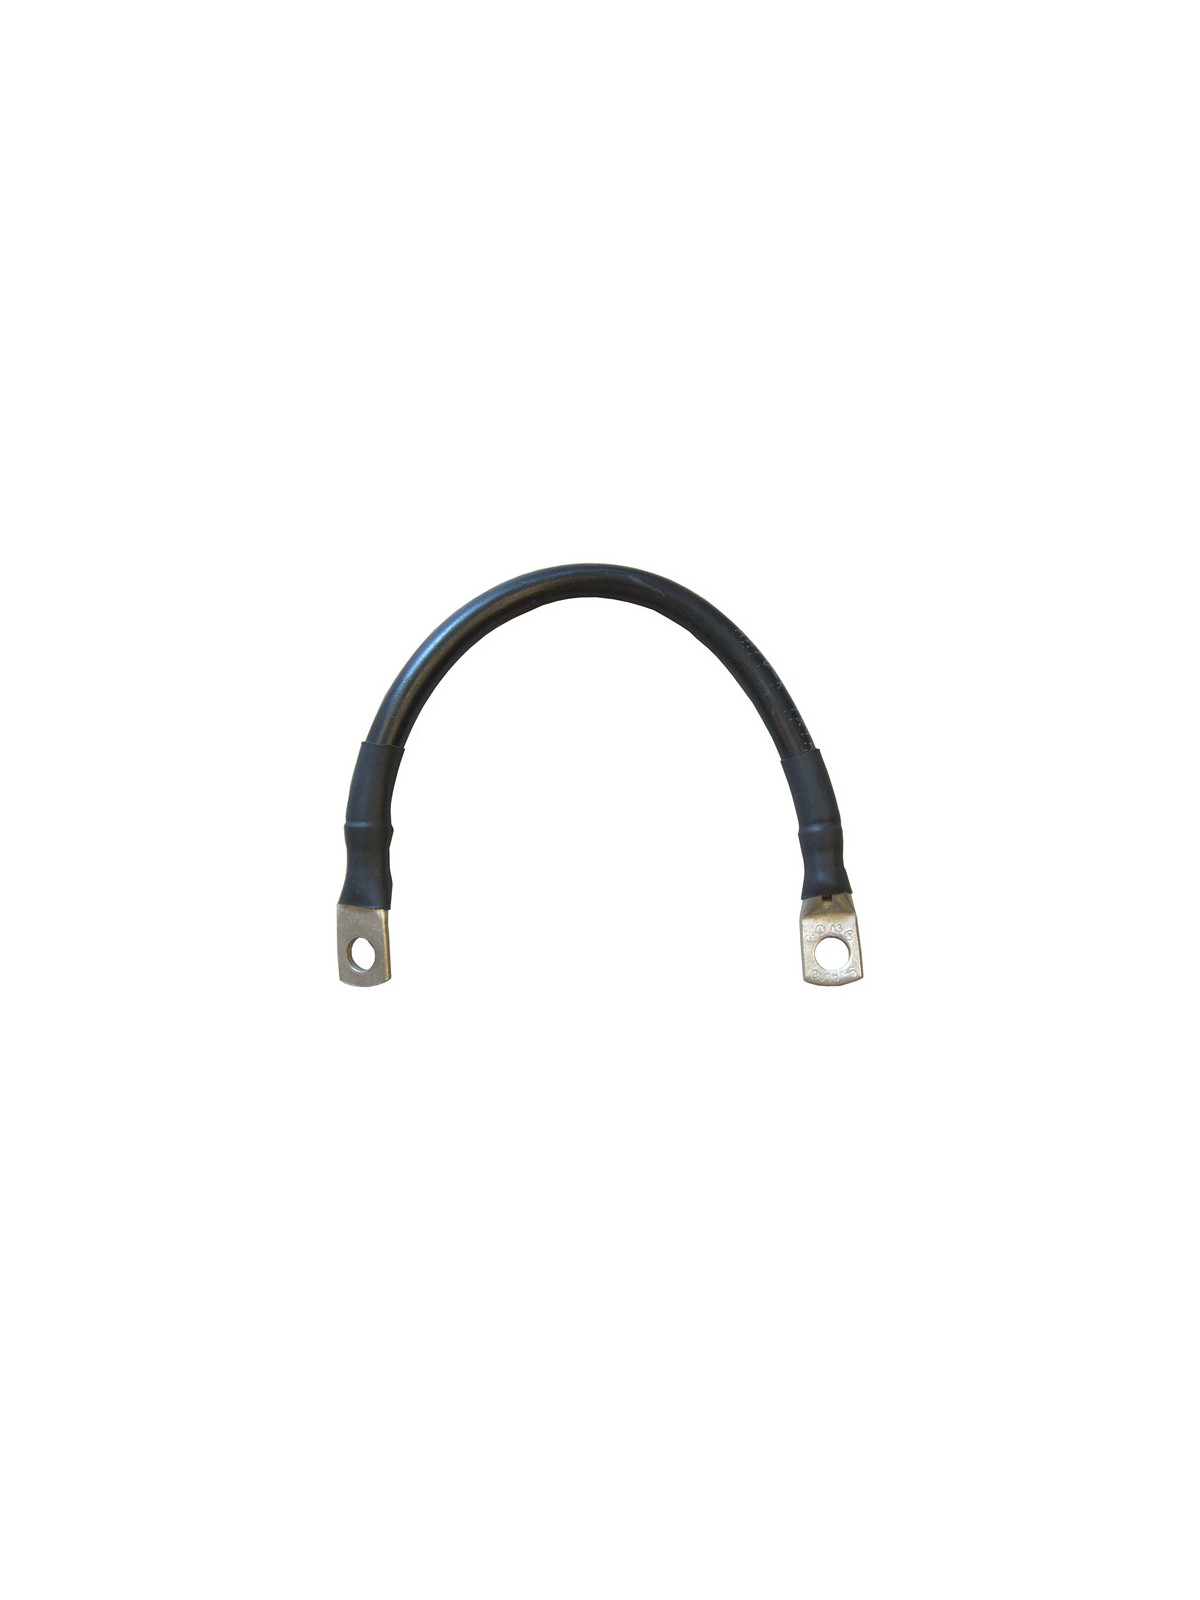 16mm² flexible cable with crimped battery terminals